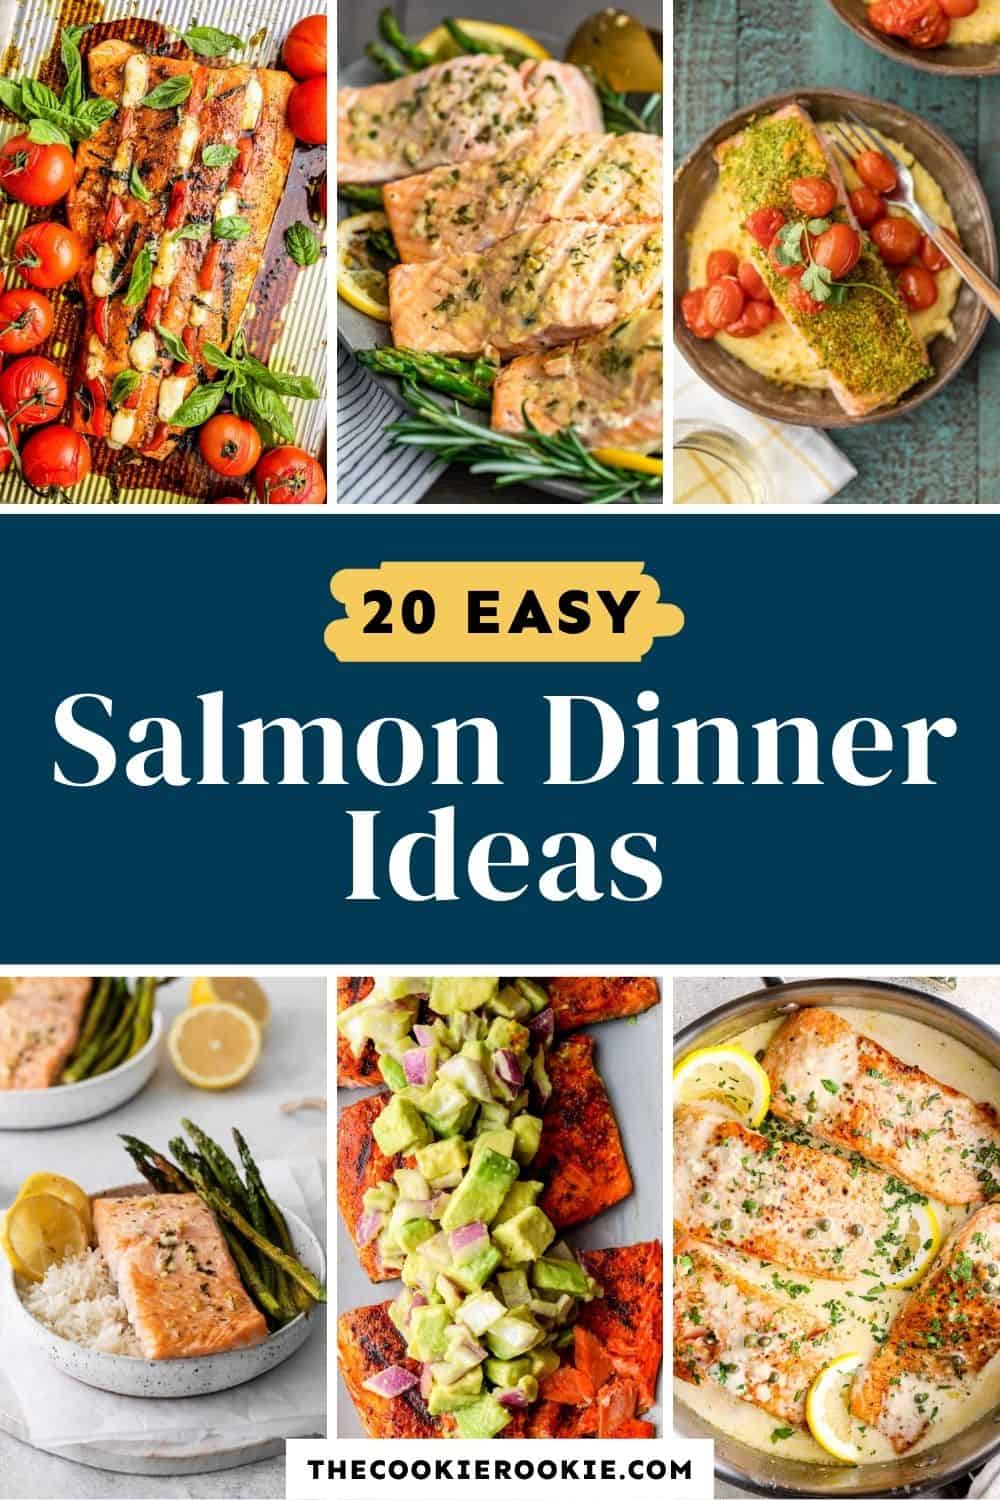 20 Salmon Dinner Ideas Story - The Cookie Rookie®